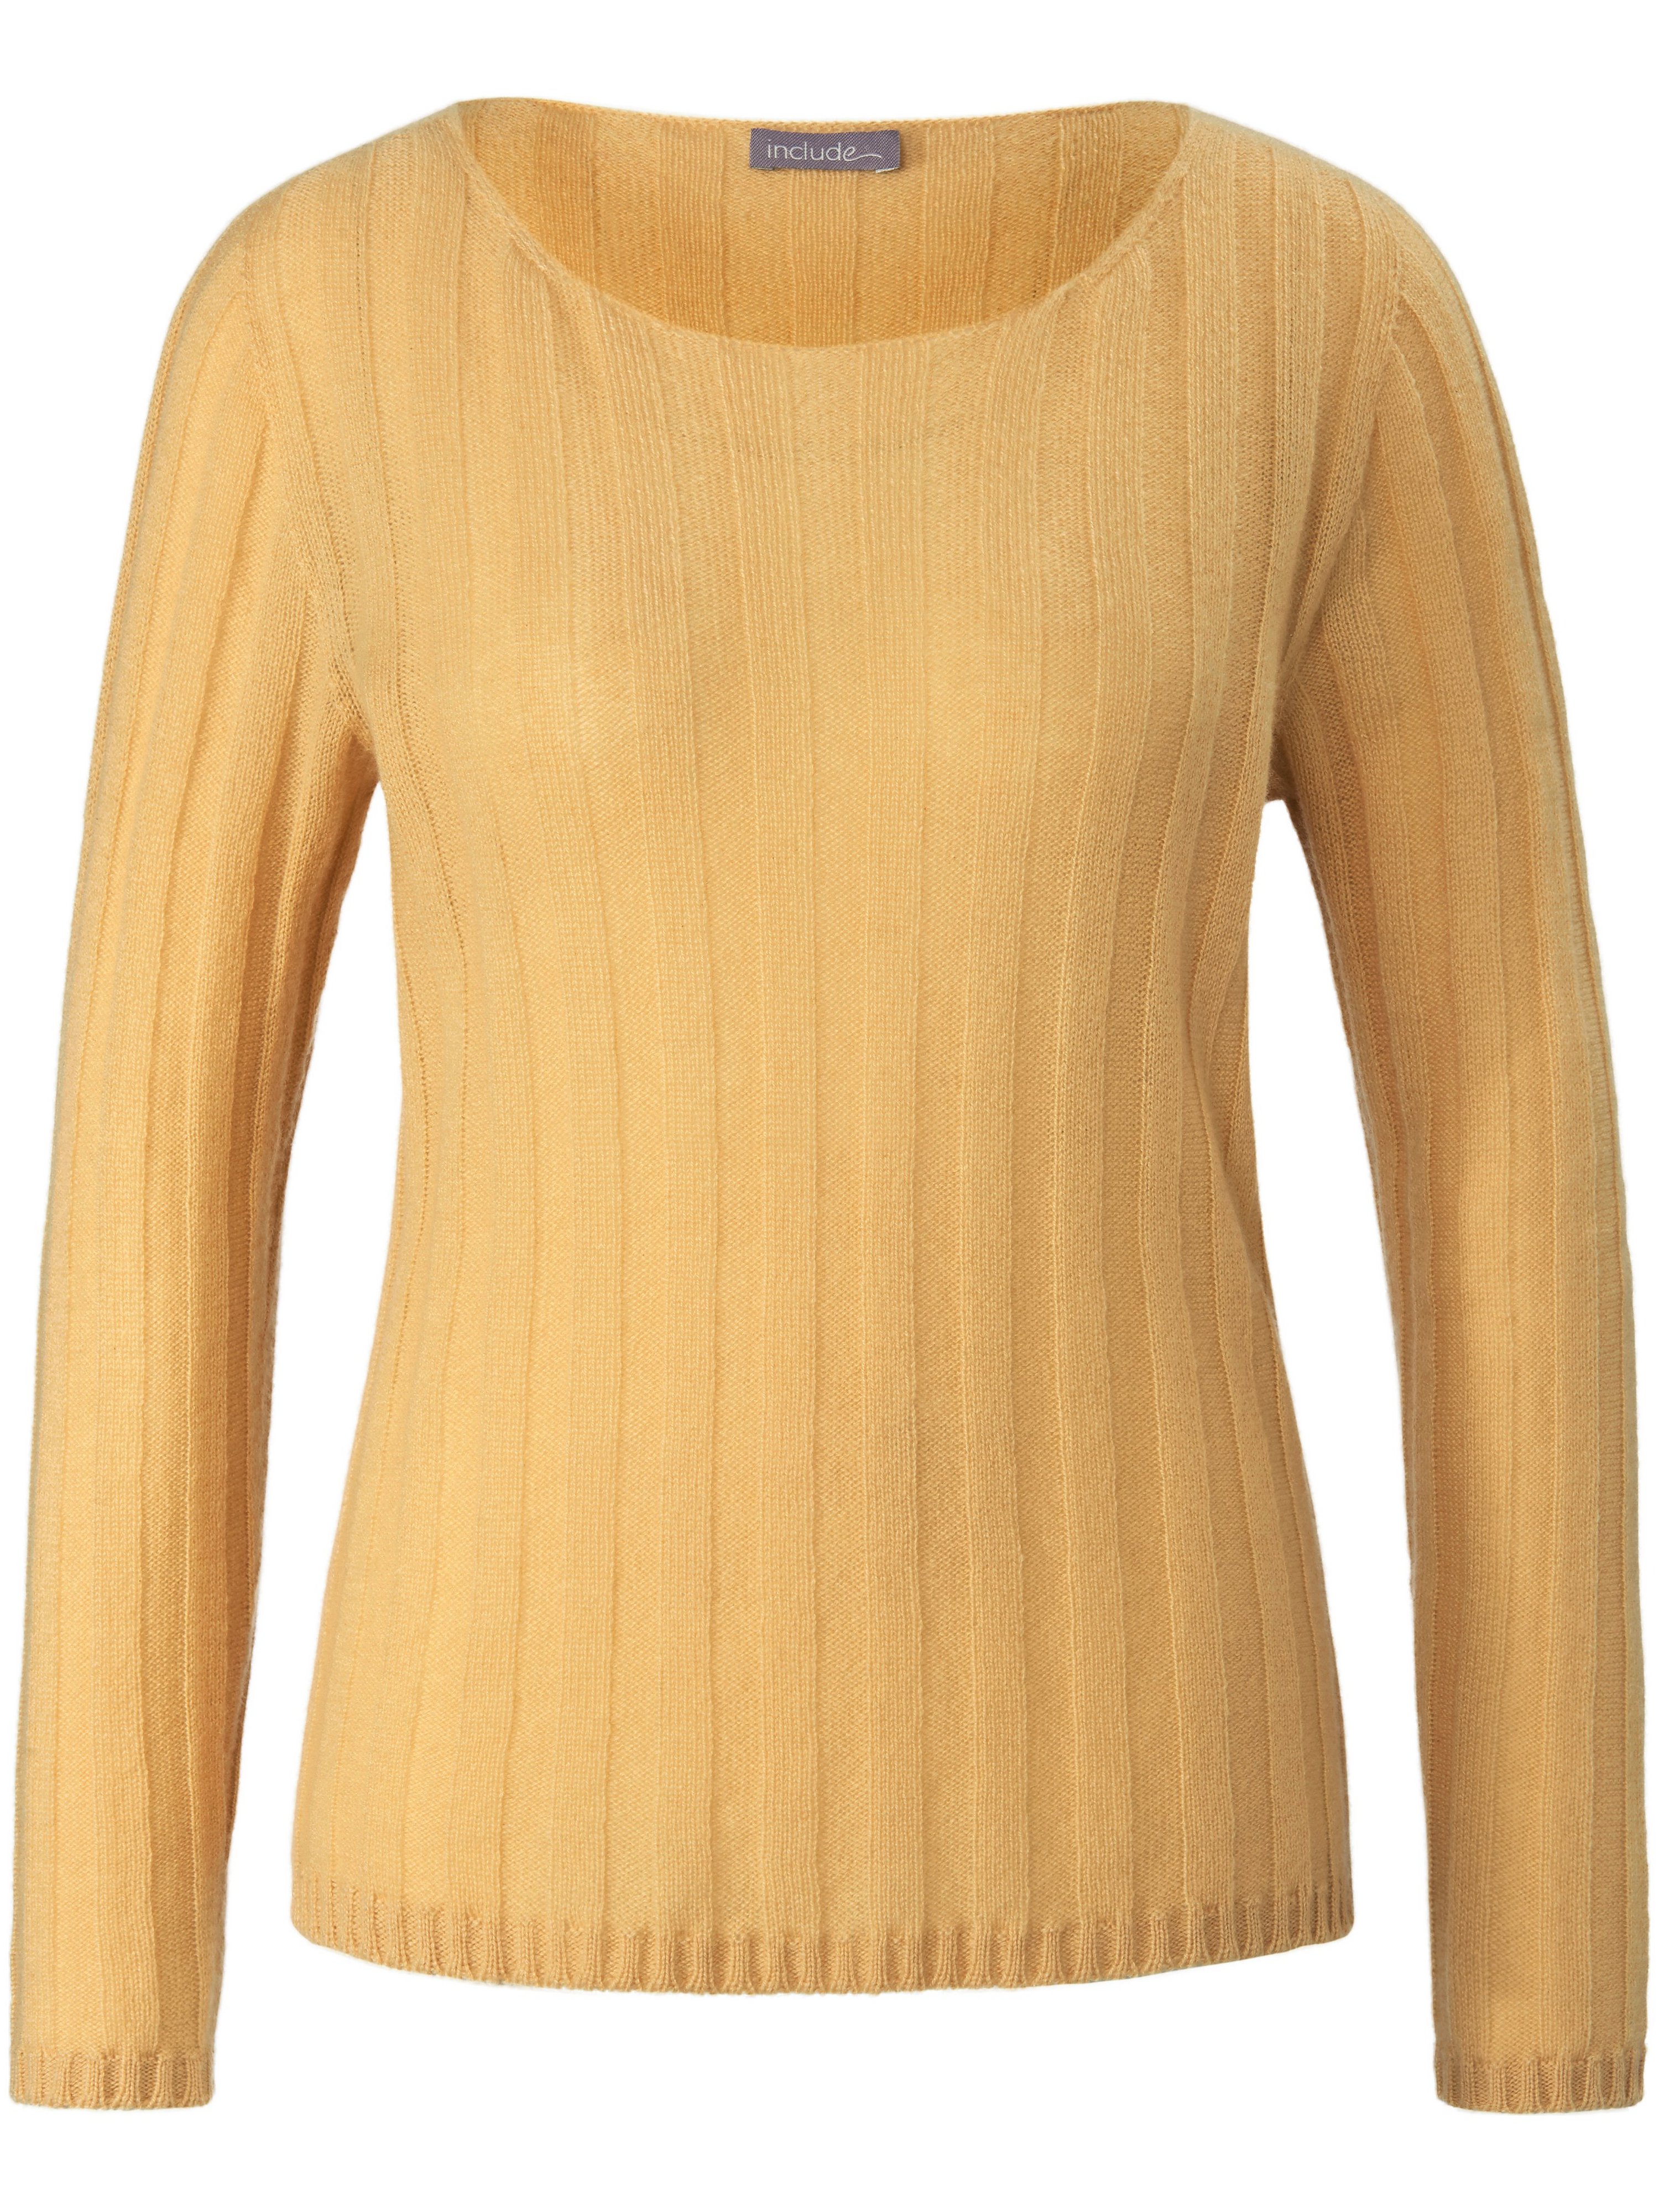 Le pull 100% cachemire  include jaune taille 50